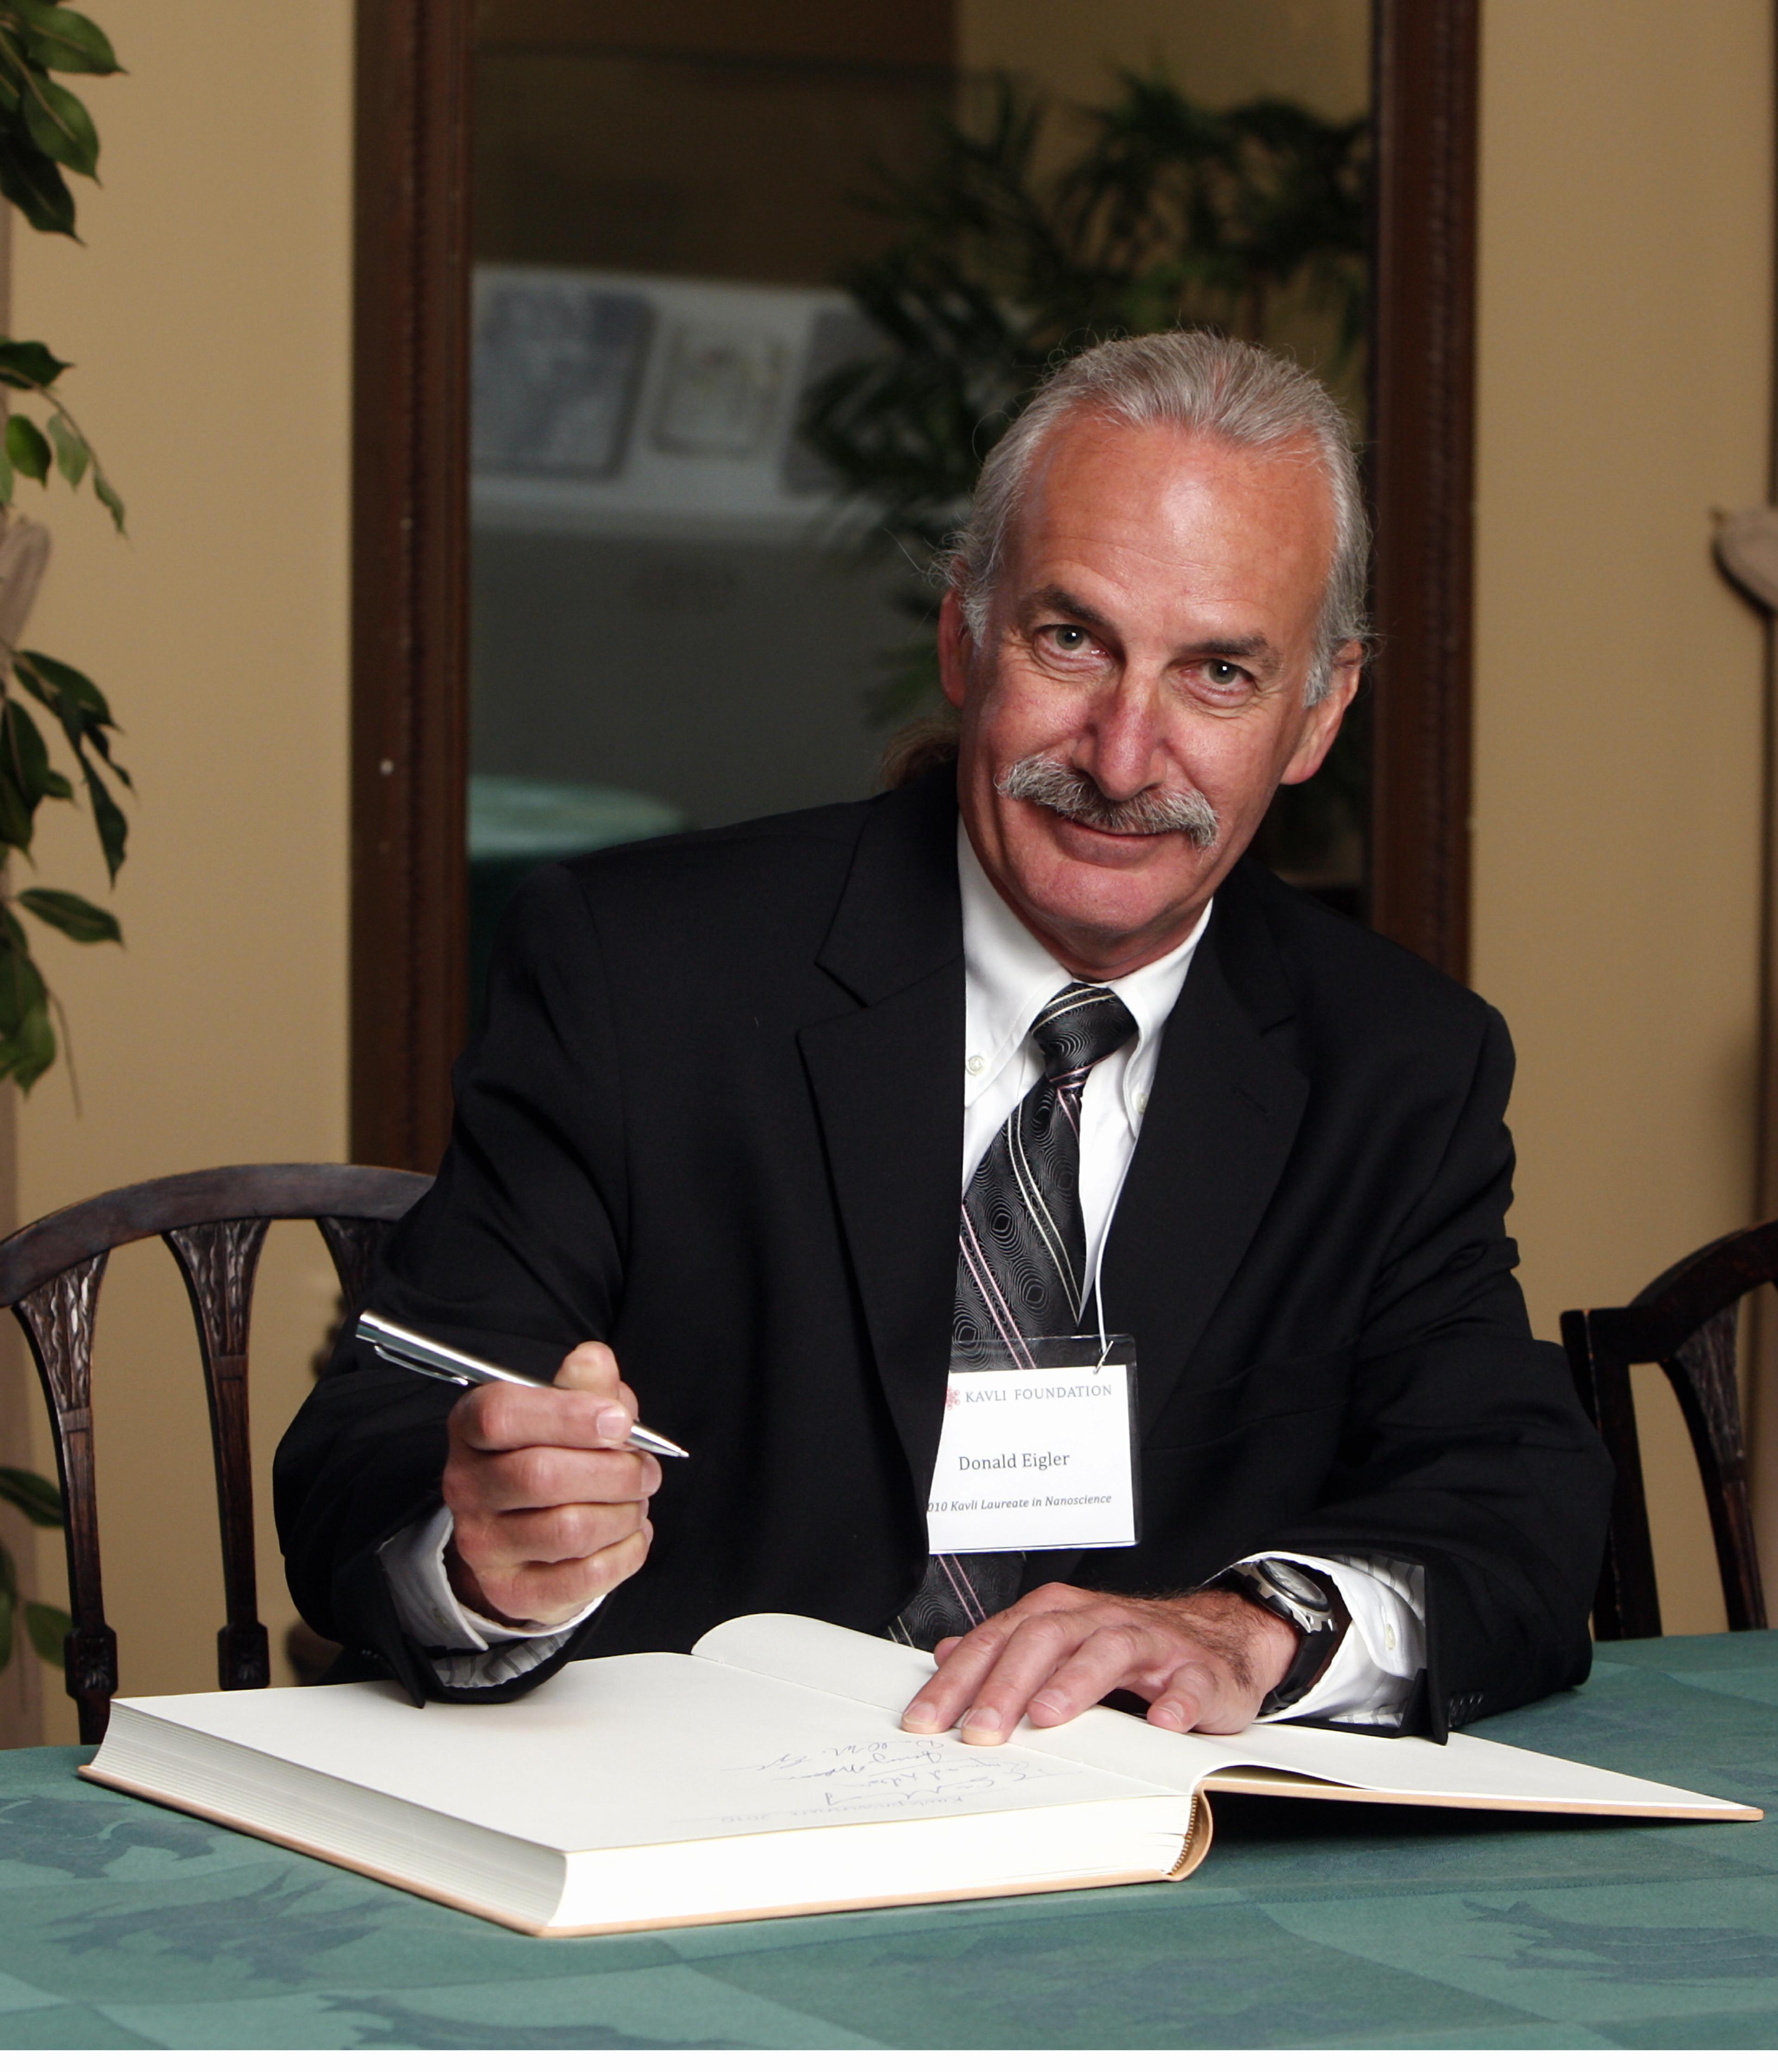 Donald M. Eigler signing the guest book 